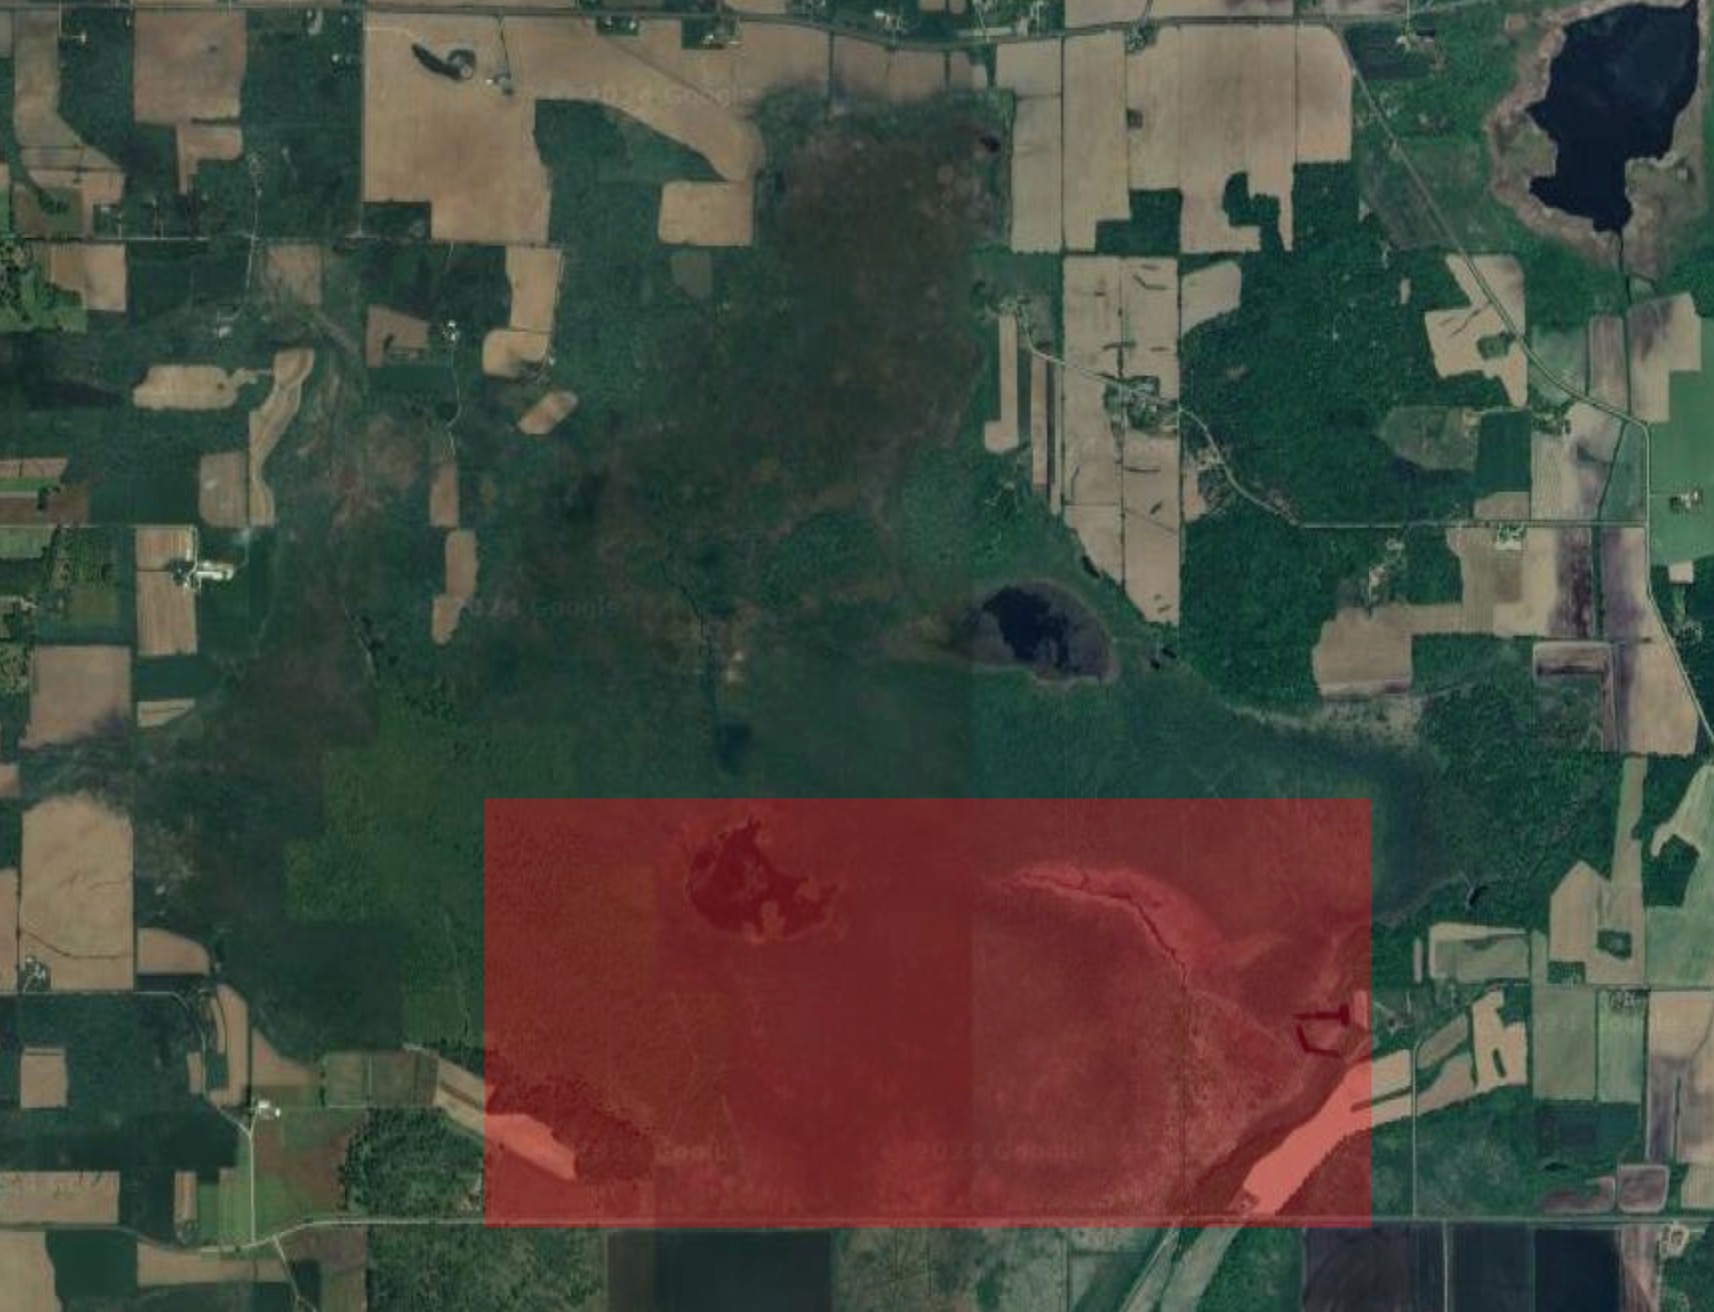 Arial satellite view of forested area with red box indicating study site